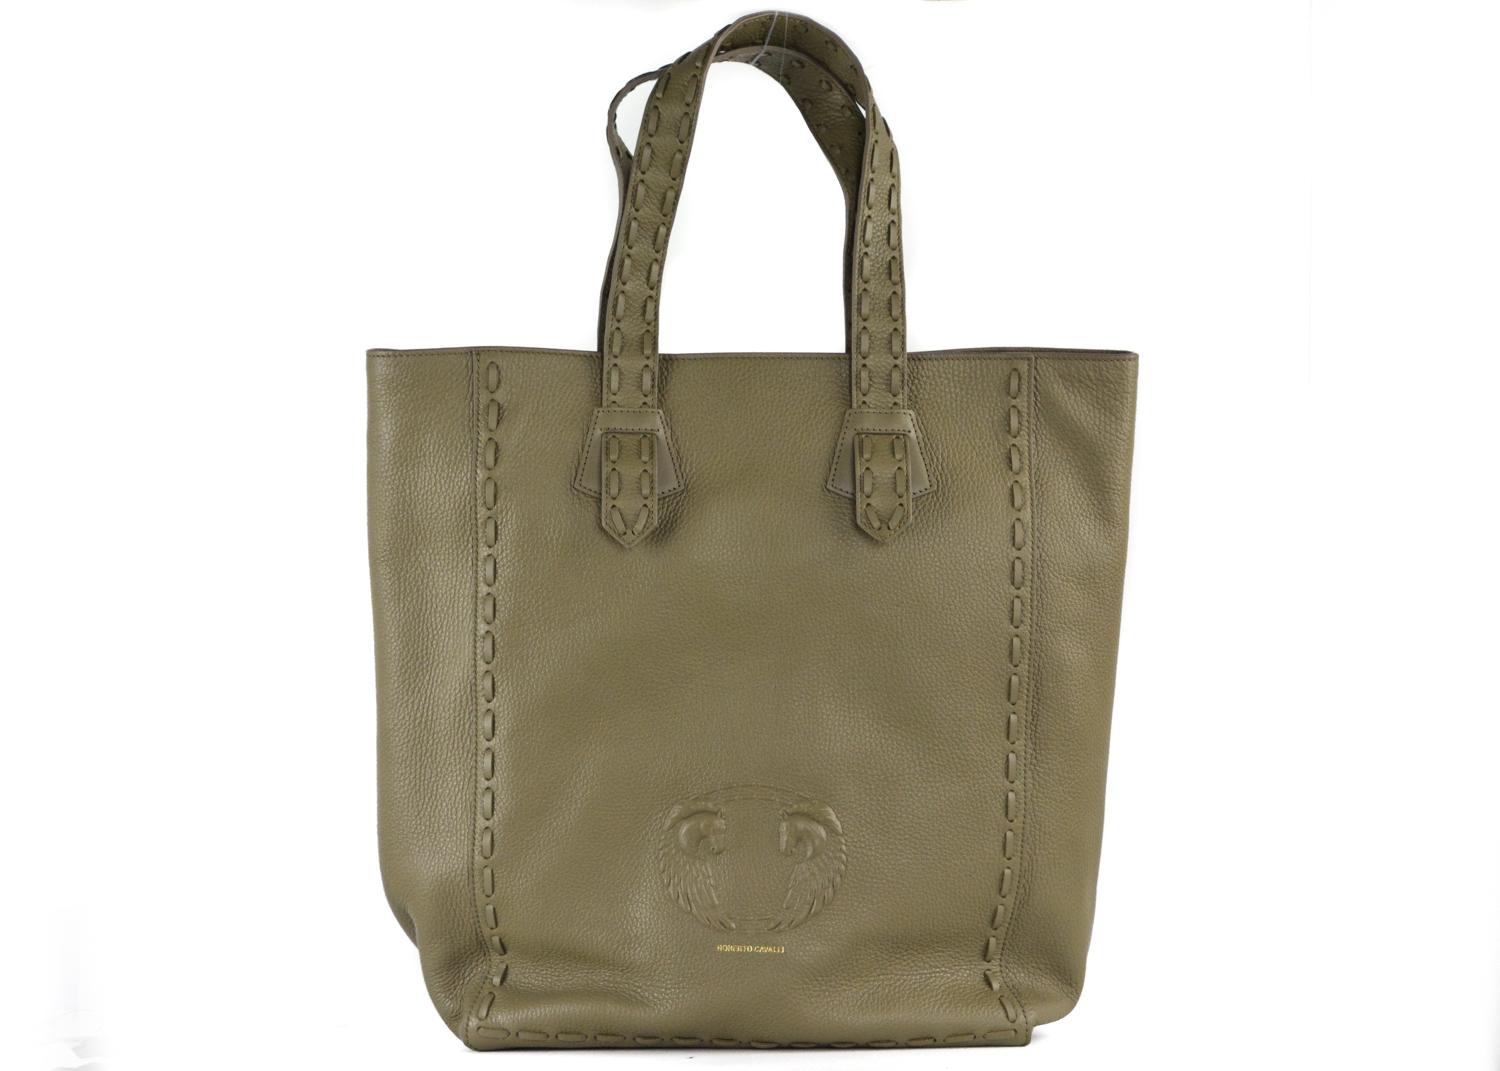 Roberto Cavalli displays casual sophistication with this olive green tote bag. This tote features grained leather, tonal stitched trim, and signature embossed winged horse. You can store your essentials in this hold all unit with confidence thanks